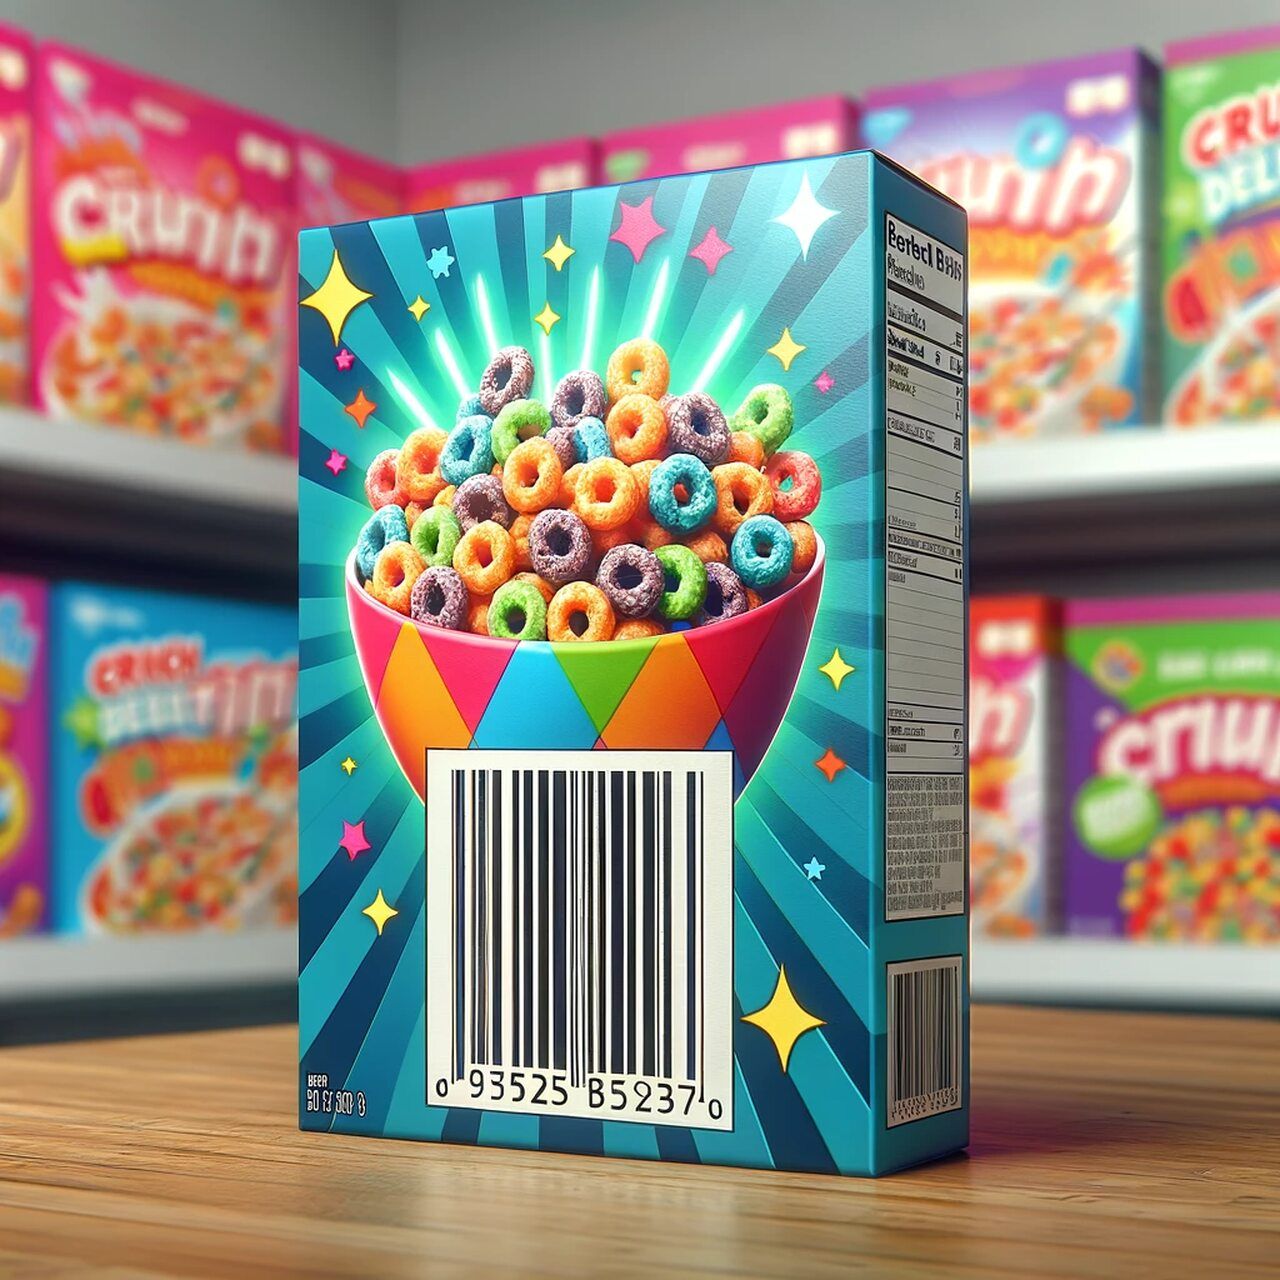 the barcode sample on a cereal brand